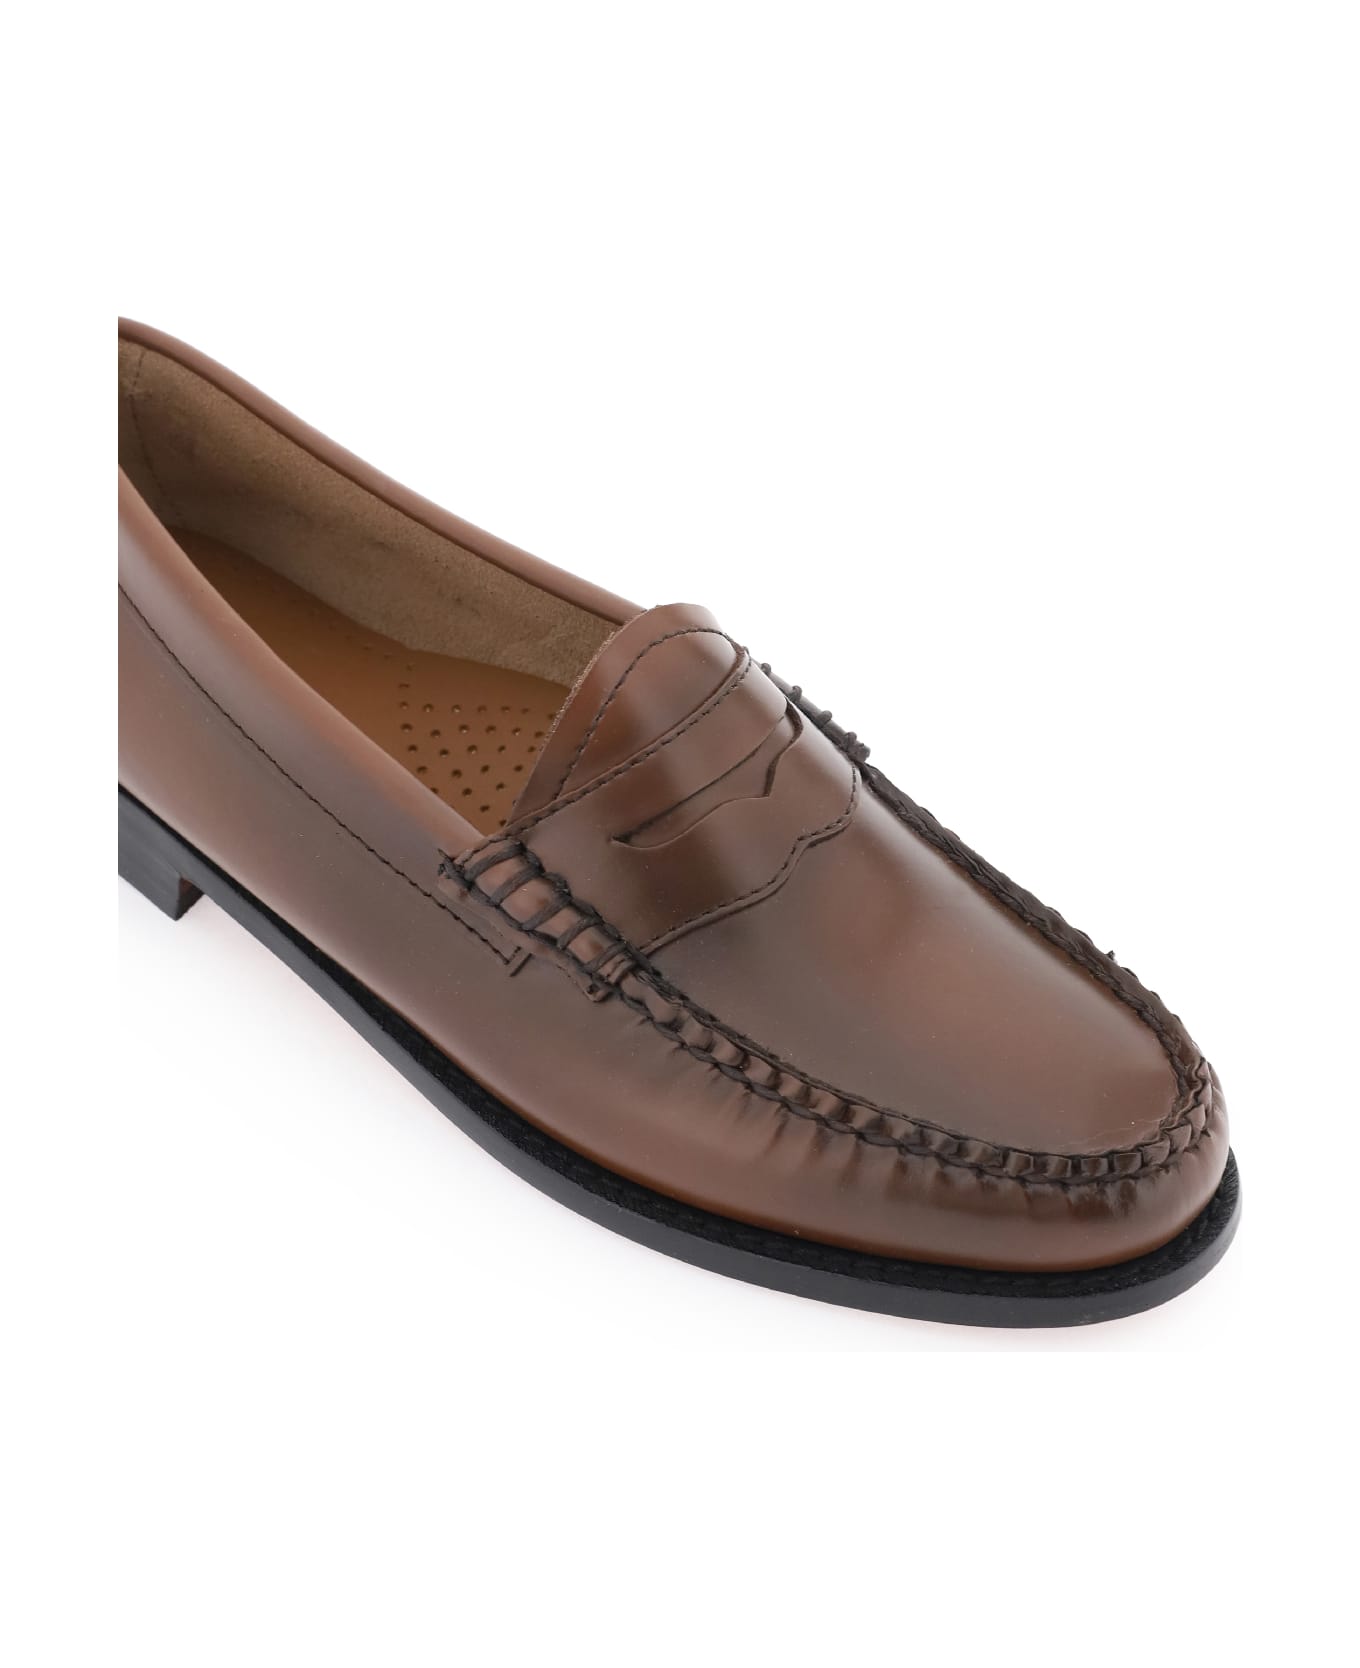 G.H.Bass & Co. Weejuns Penny Loafers - COGNAC (Brown) フラットシューズ